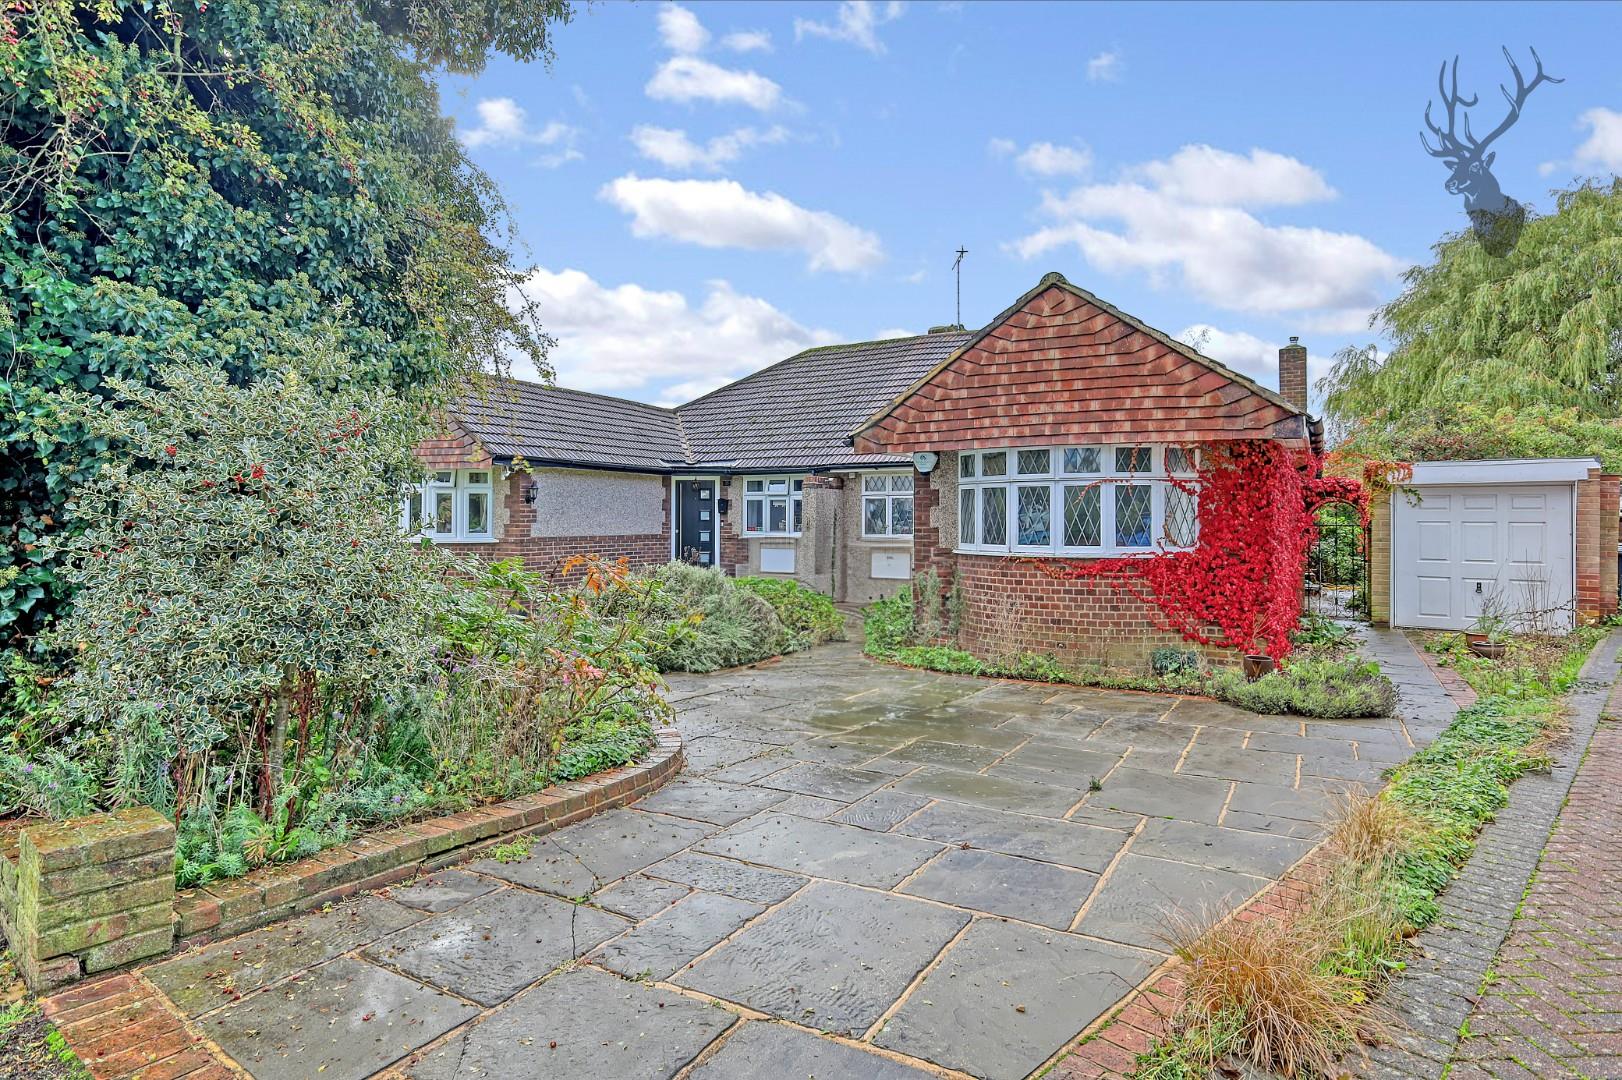 Similar Property: Bungalow - Semi Detached in Theydon Bois